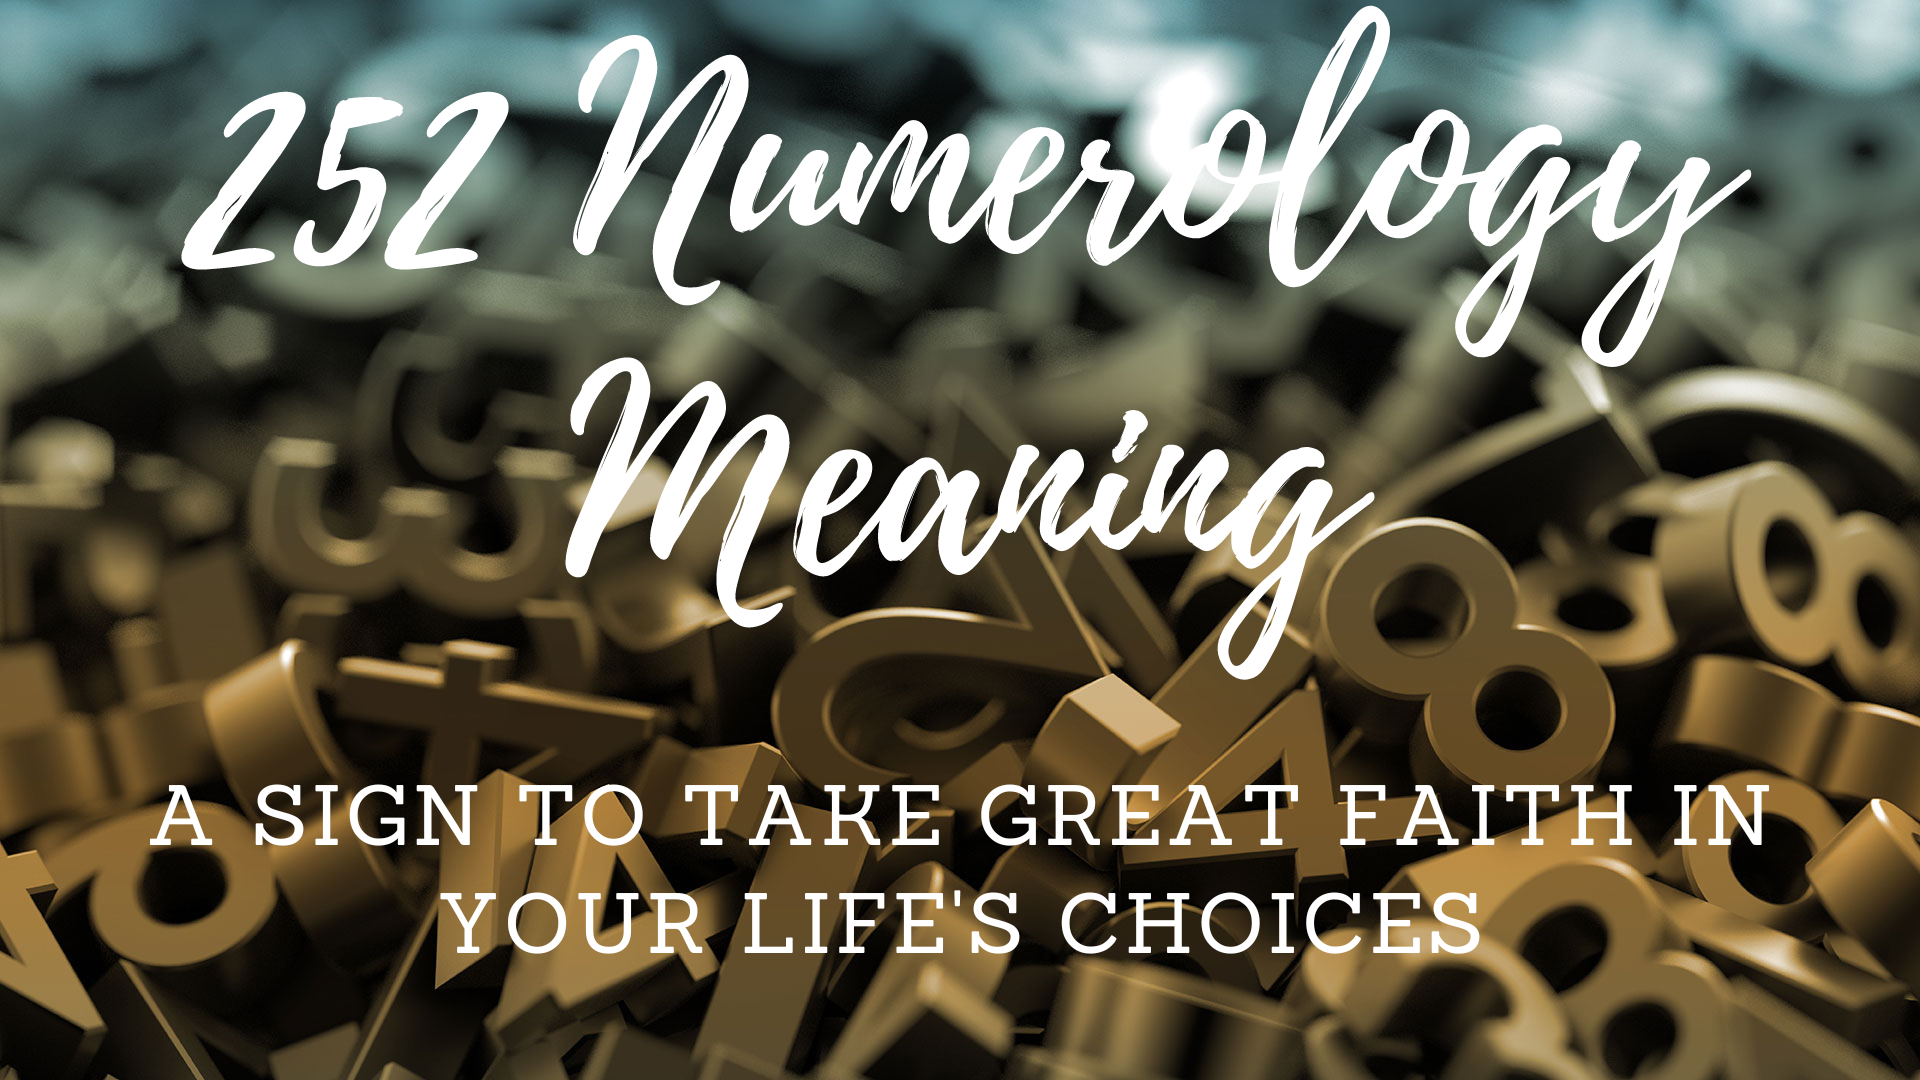 252 Numerology Meaning - A Sign To Take Great Faith In Your Life's Choices